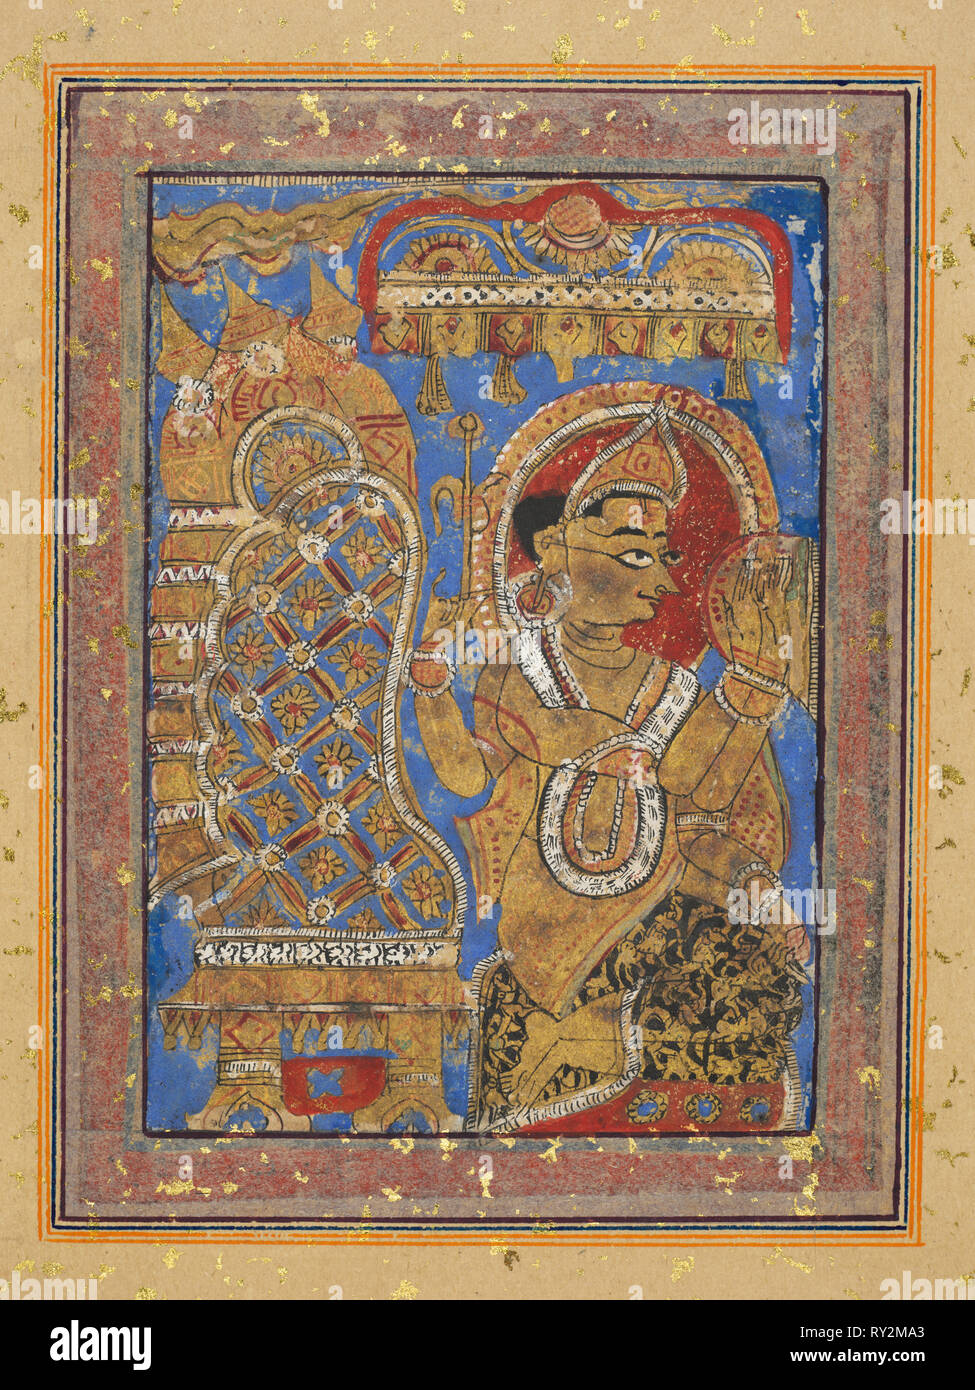 Page from a Kalpa-sutra: Indra paying homage to Mahavira, early 16th century. Jain, Western India, Gujarat, early 16th century. Ink and color on paper; 18th century gold flecked paper border; image: 9.5 x 6.8 cm (3 3/4 x 2 11/16 in.); overall: 22.3 x 17.7 cm (8 3/4 x 6 15/16 in Stock Photo